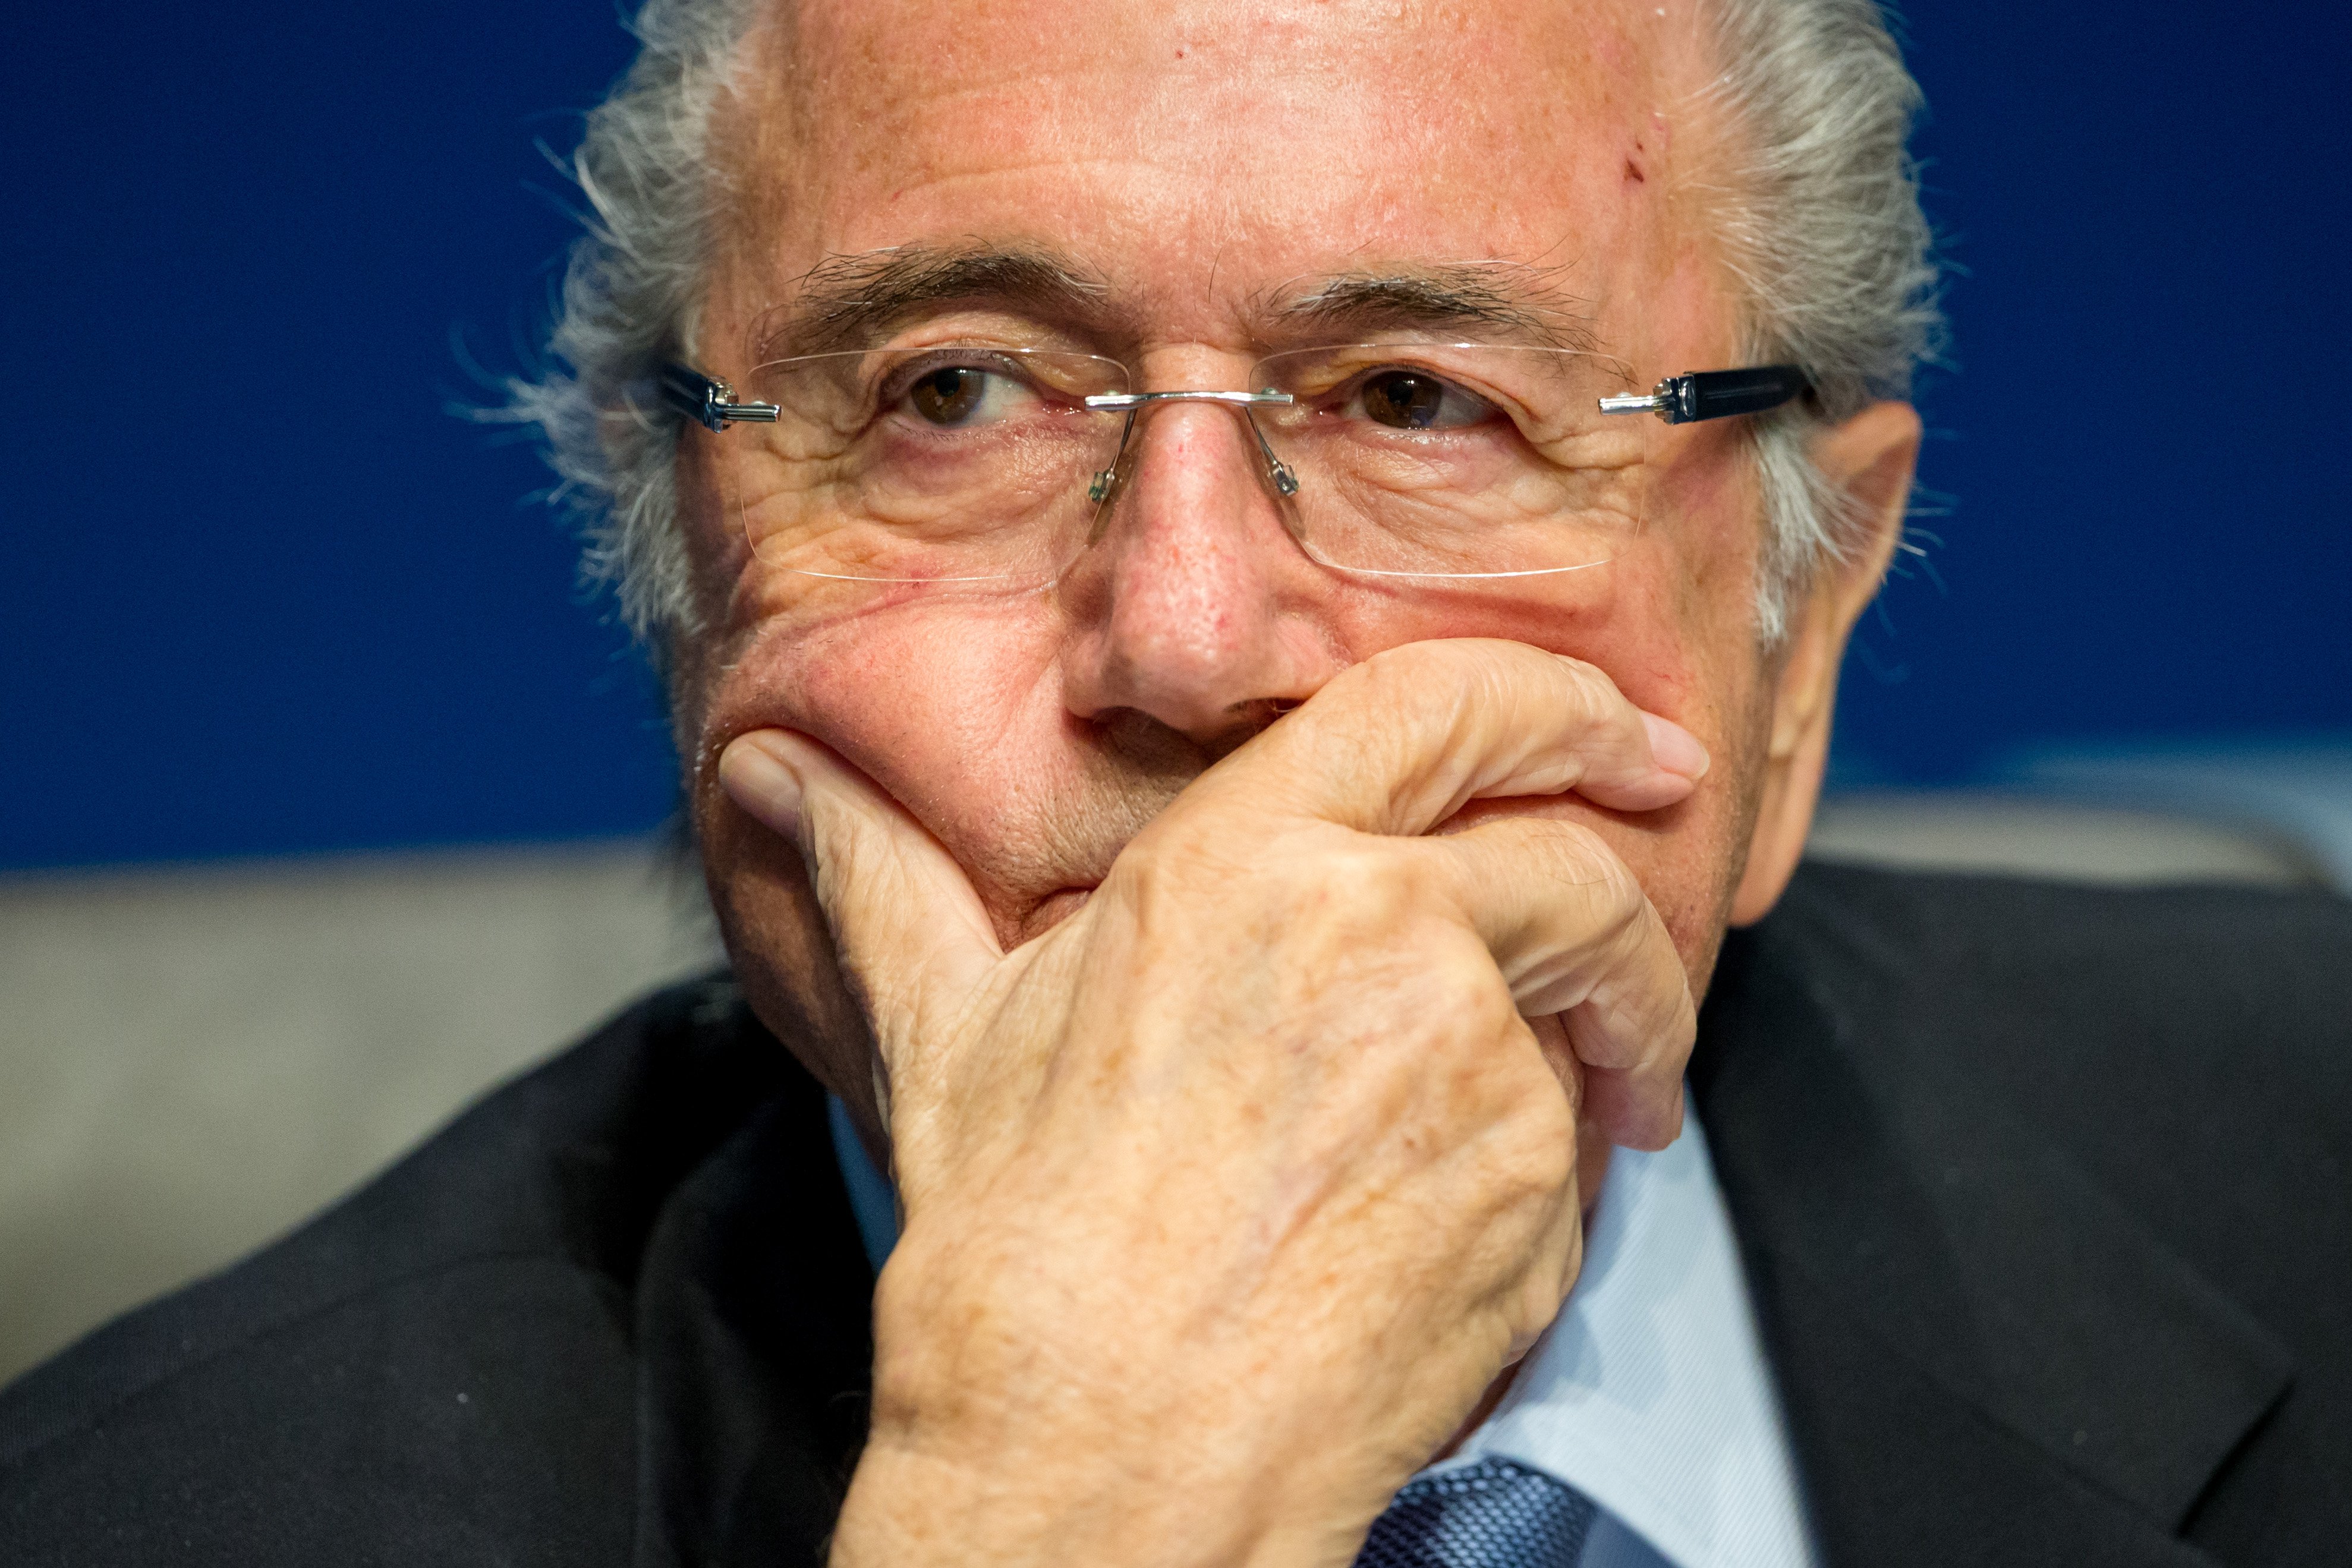 Sepp Blatter looks on during a press conference at the end of the FIFA Executive Comitee meeting at the FIFA headquarters in Zurich, Switzerland on March 20, 2015. (Philipp Schmidli—Getty Images)